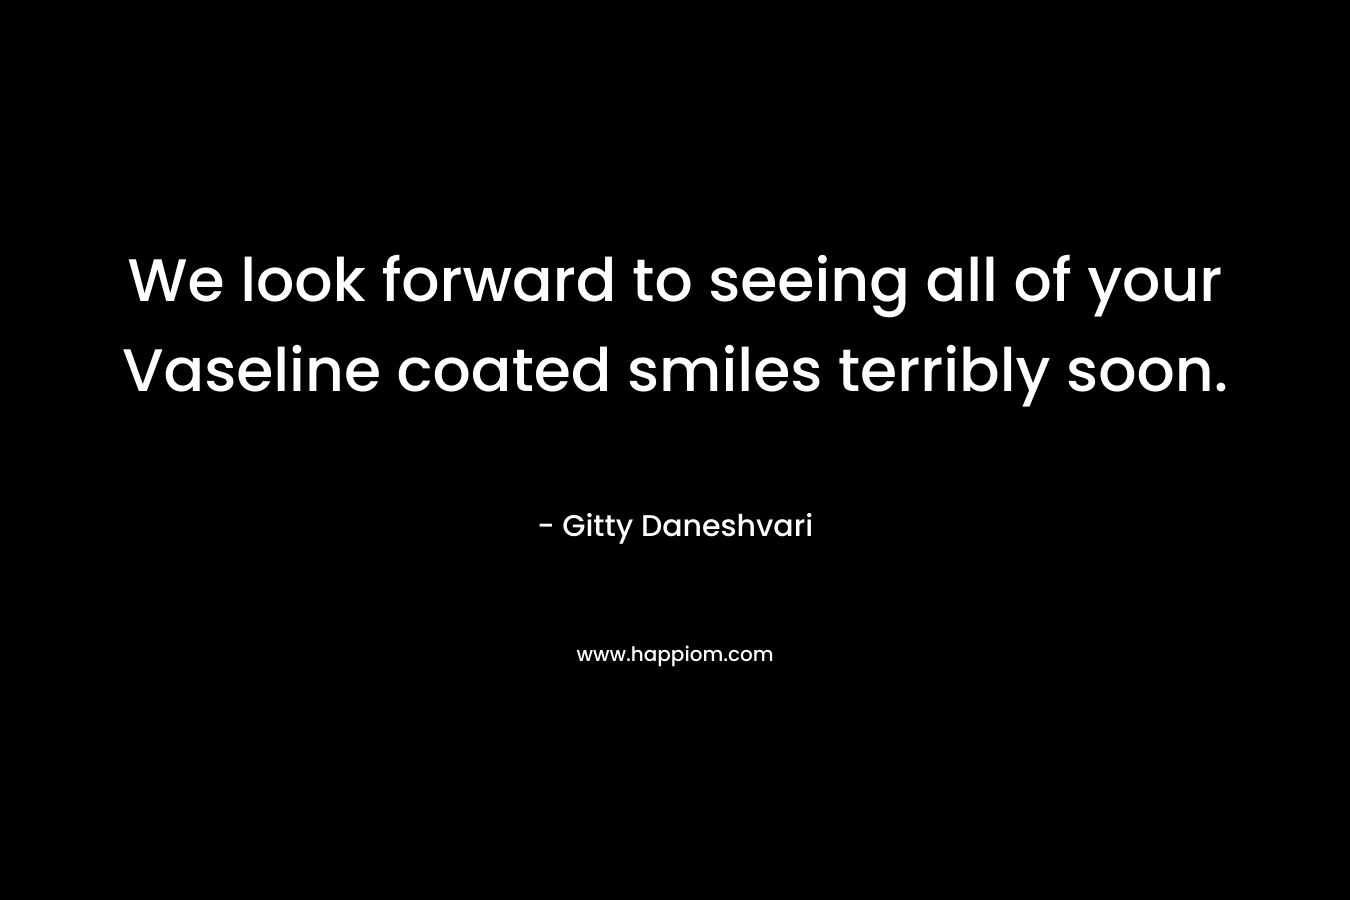 We look forward to seeing all of your Vaseline coated smiles terribly soon. – Gitty Daneshvari